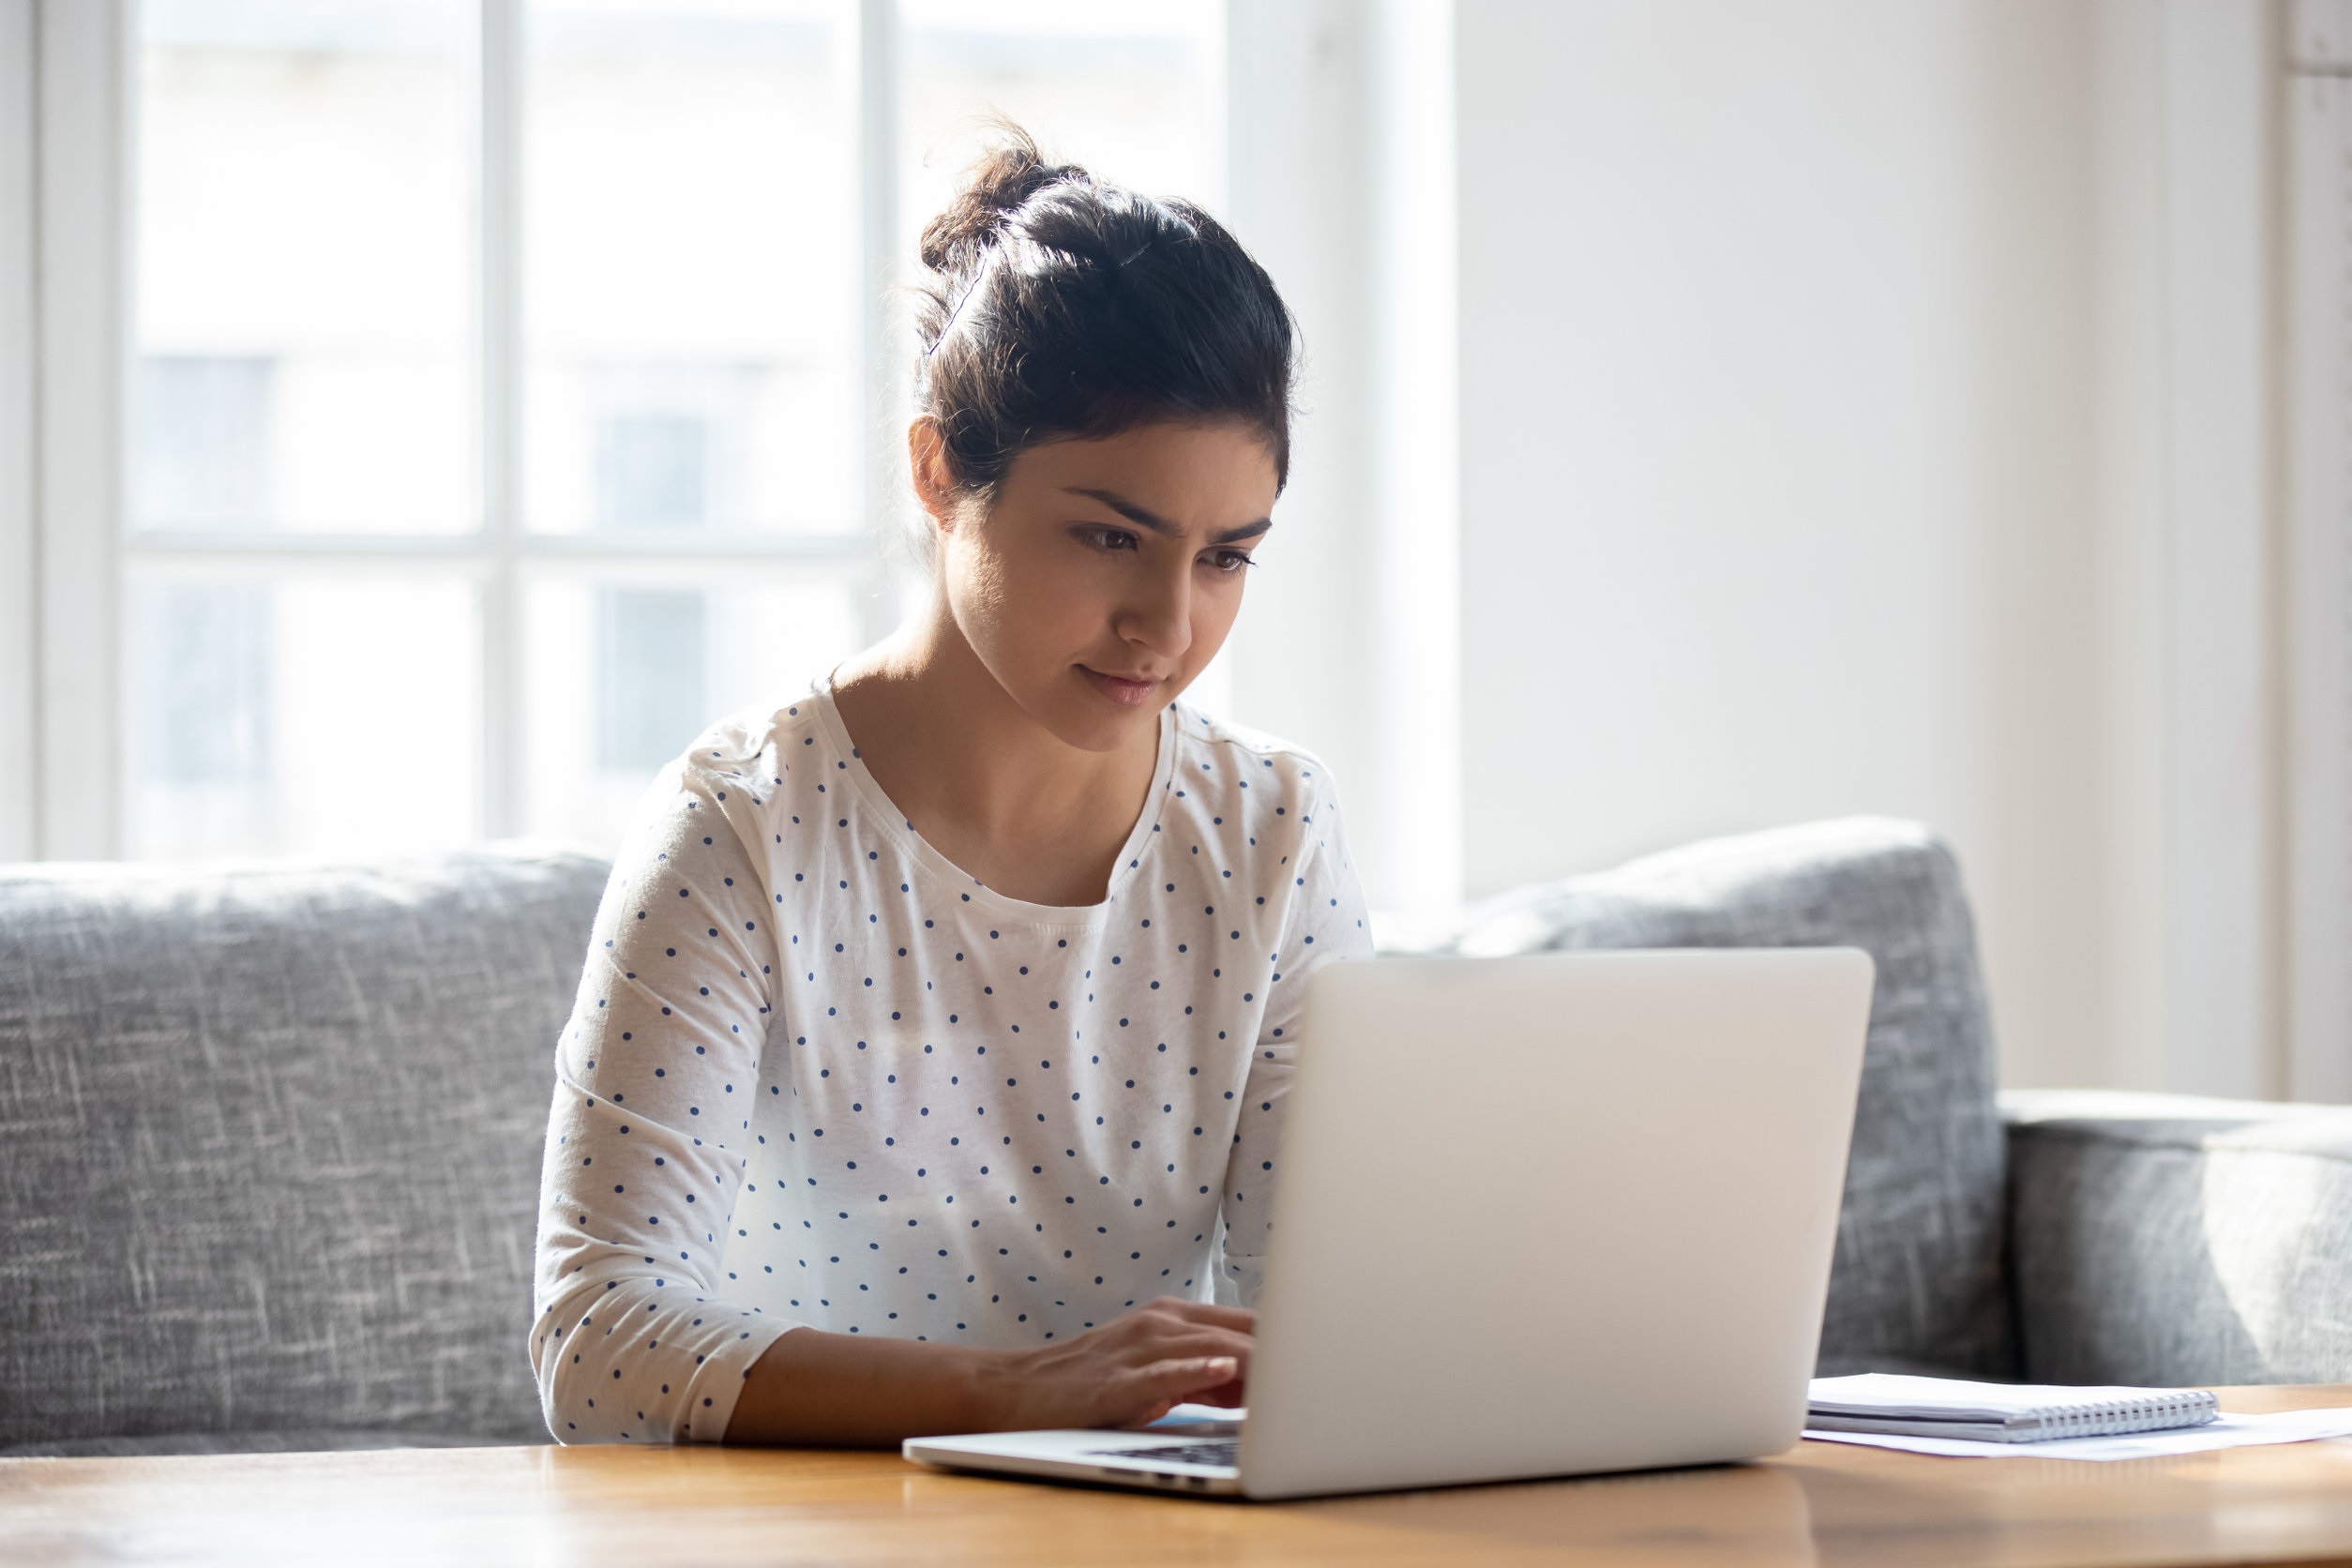 Image is of a women sitting down browsing on her laptop. 